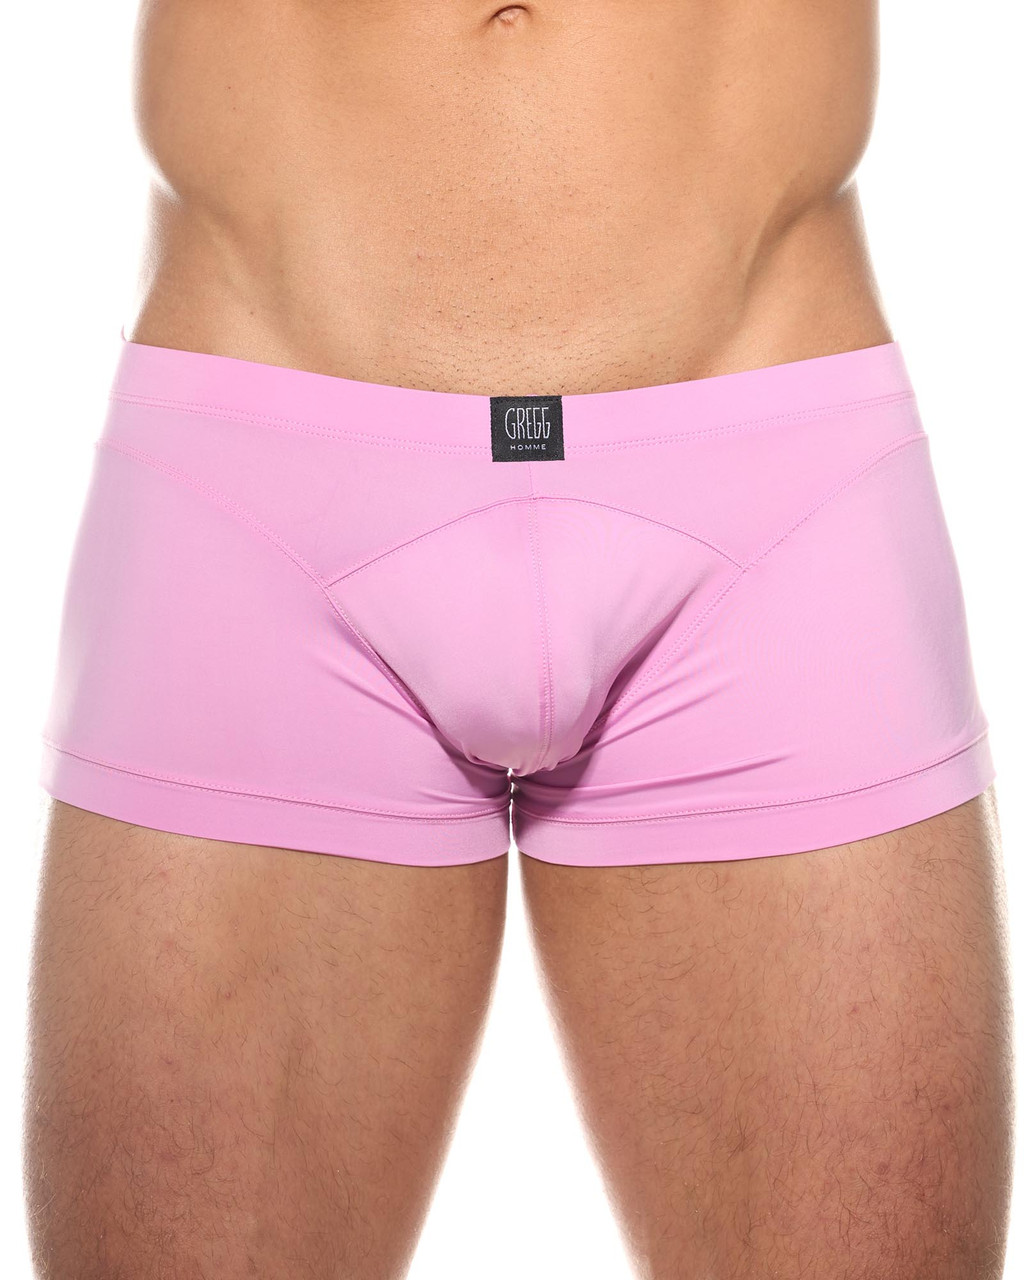 Gregg Homme Boxer Brief Push Up 2.0 Mini Boxers Padded Purple 142505 117 —